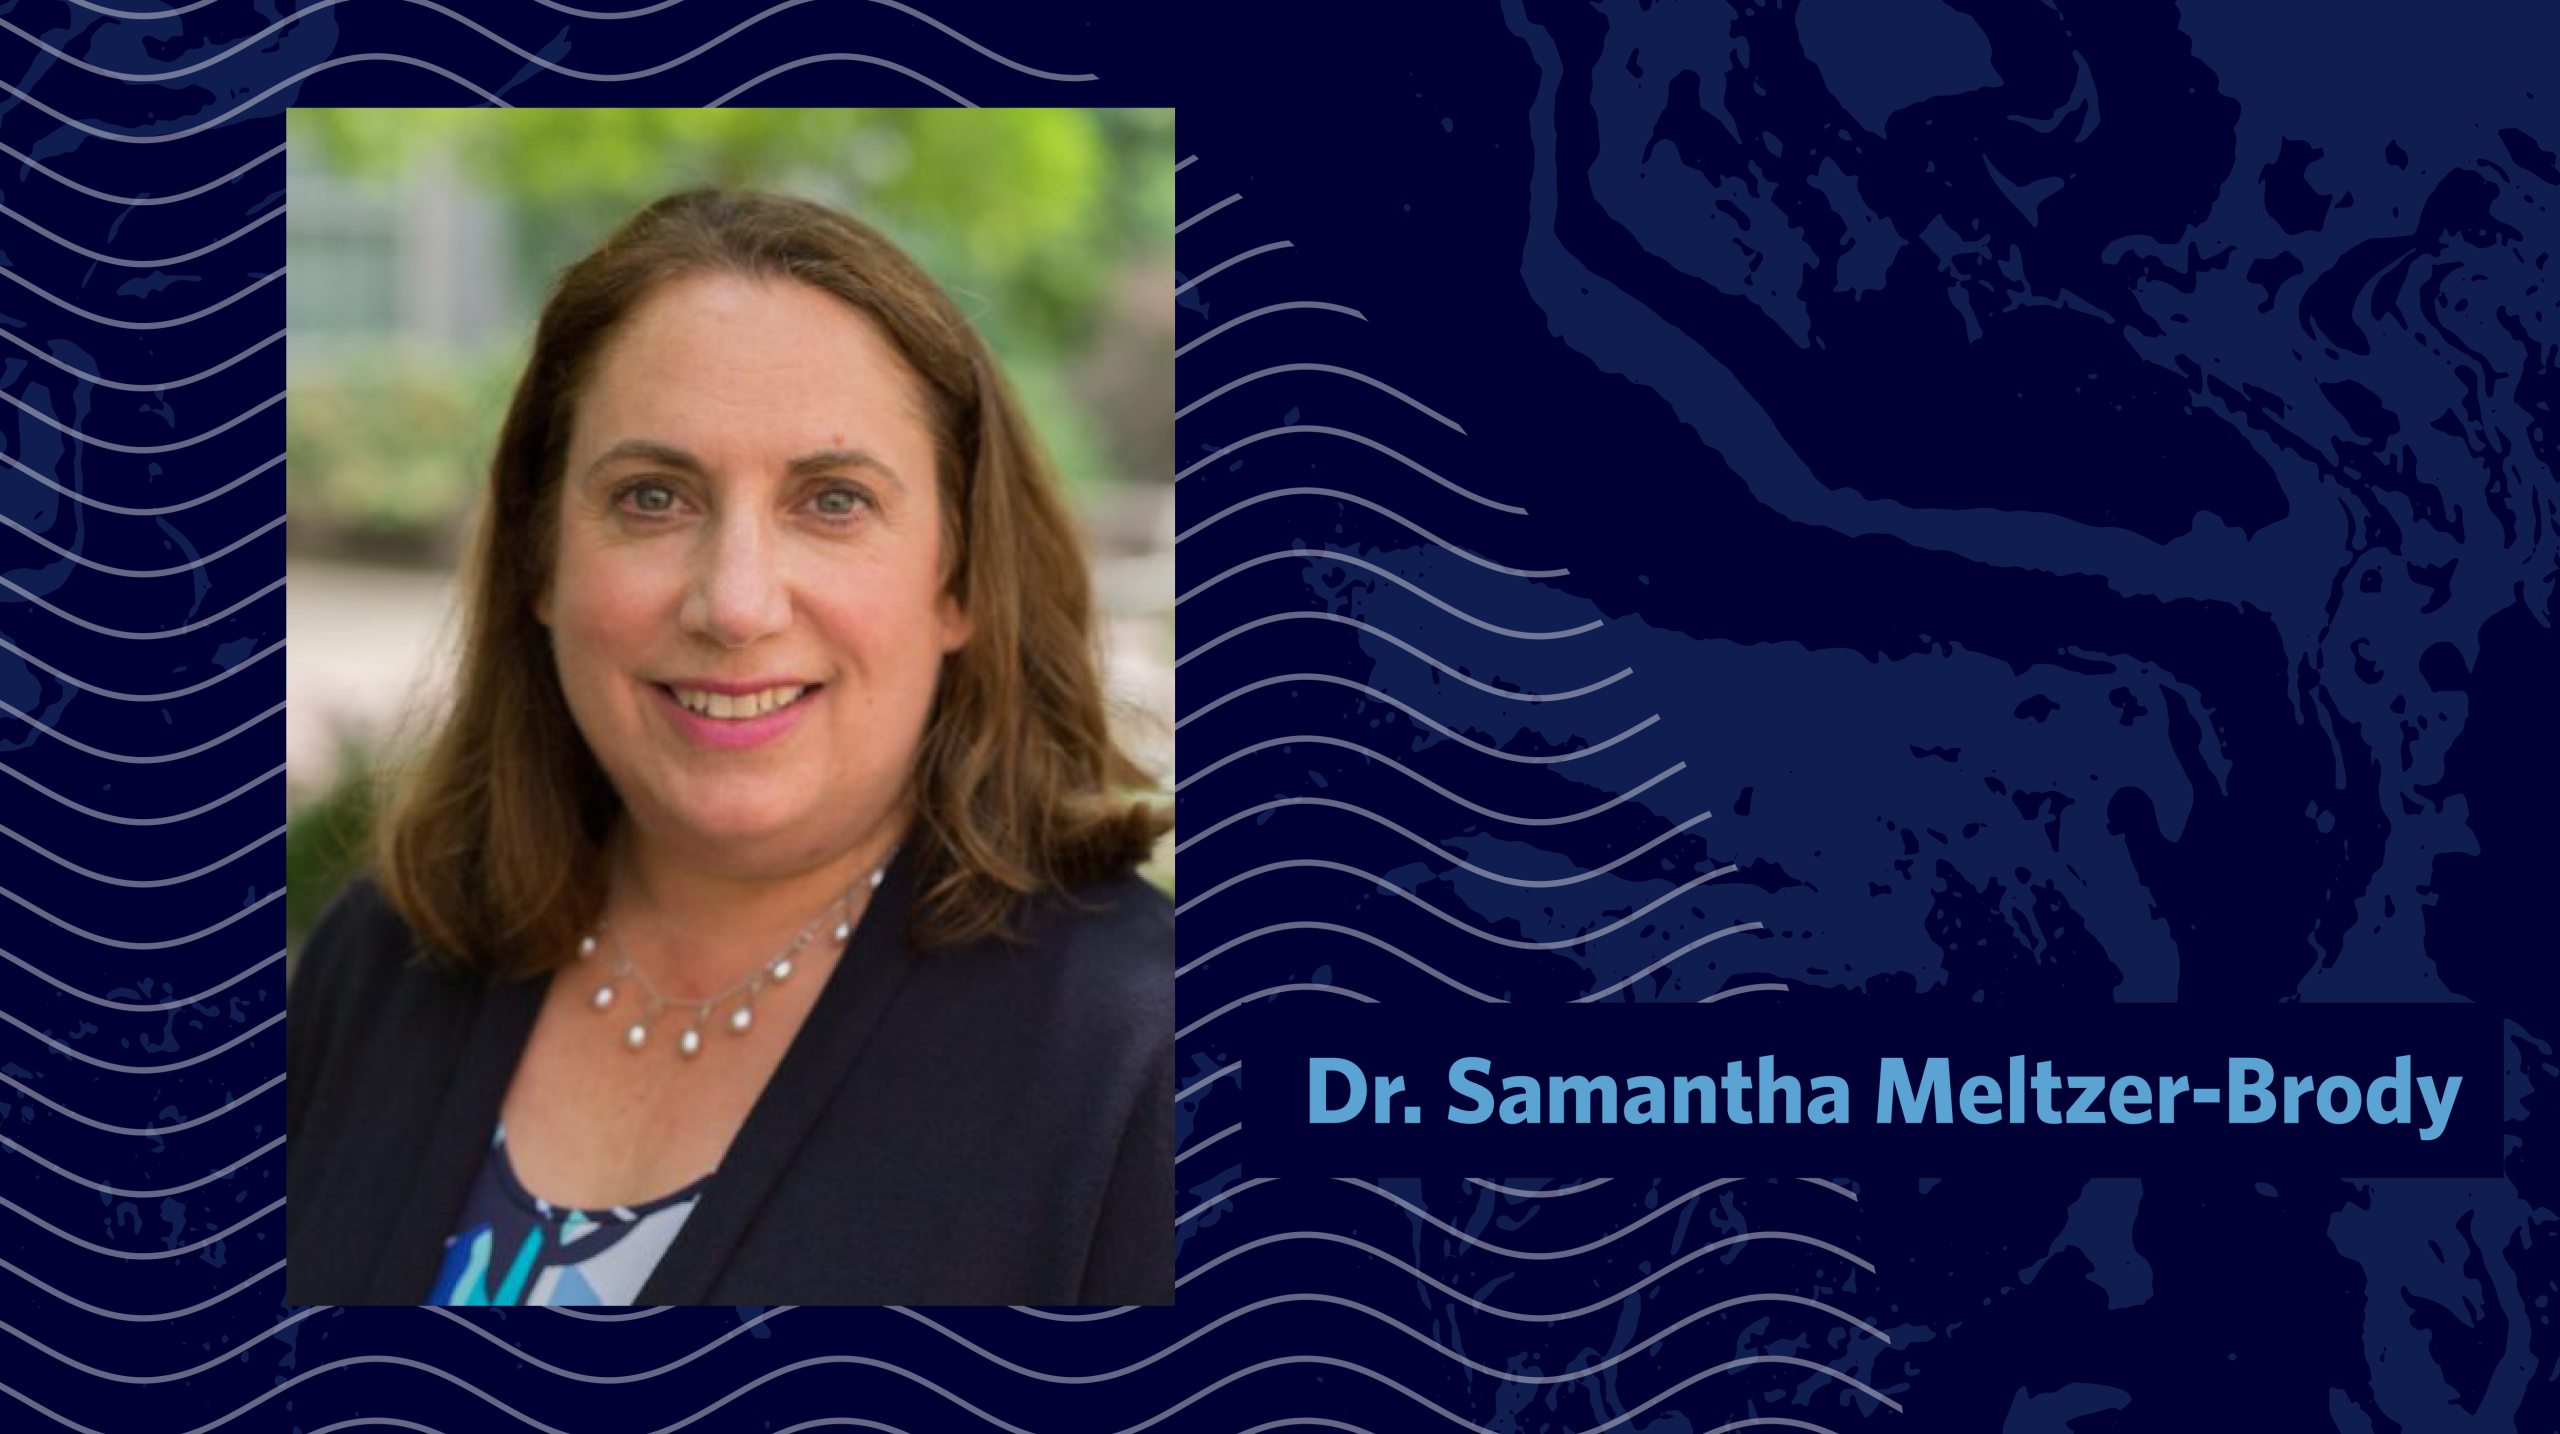 Graphic with image of Dr. Samantha Meltzer-Brody on navy blue background.